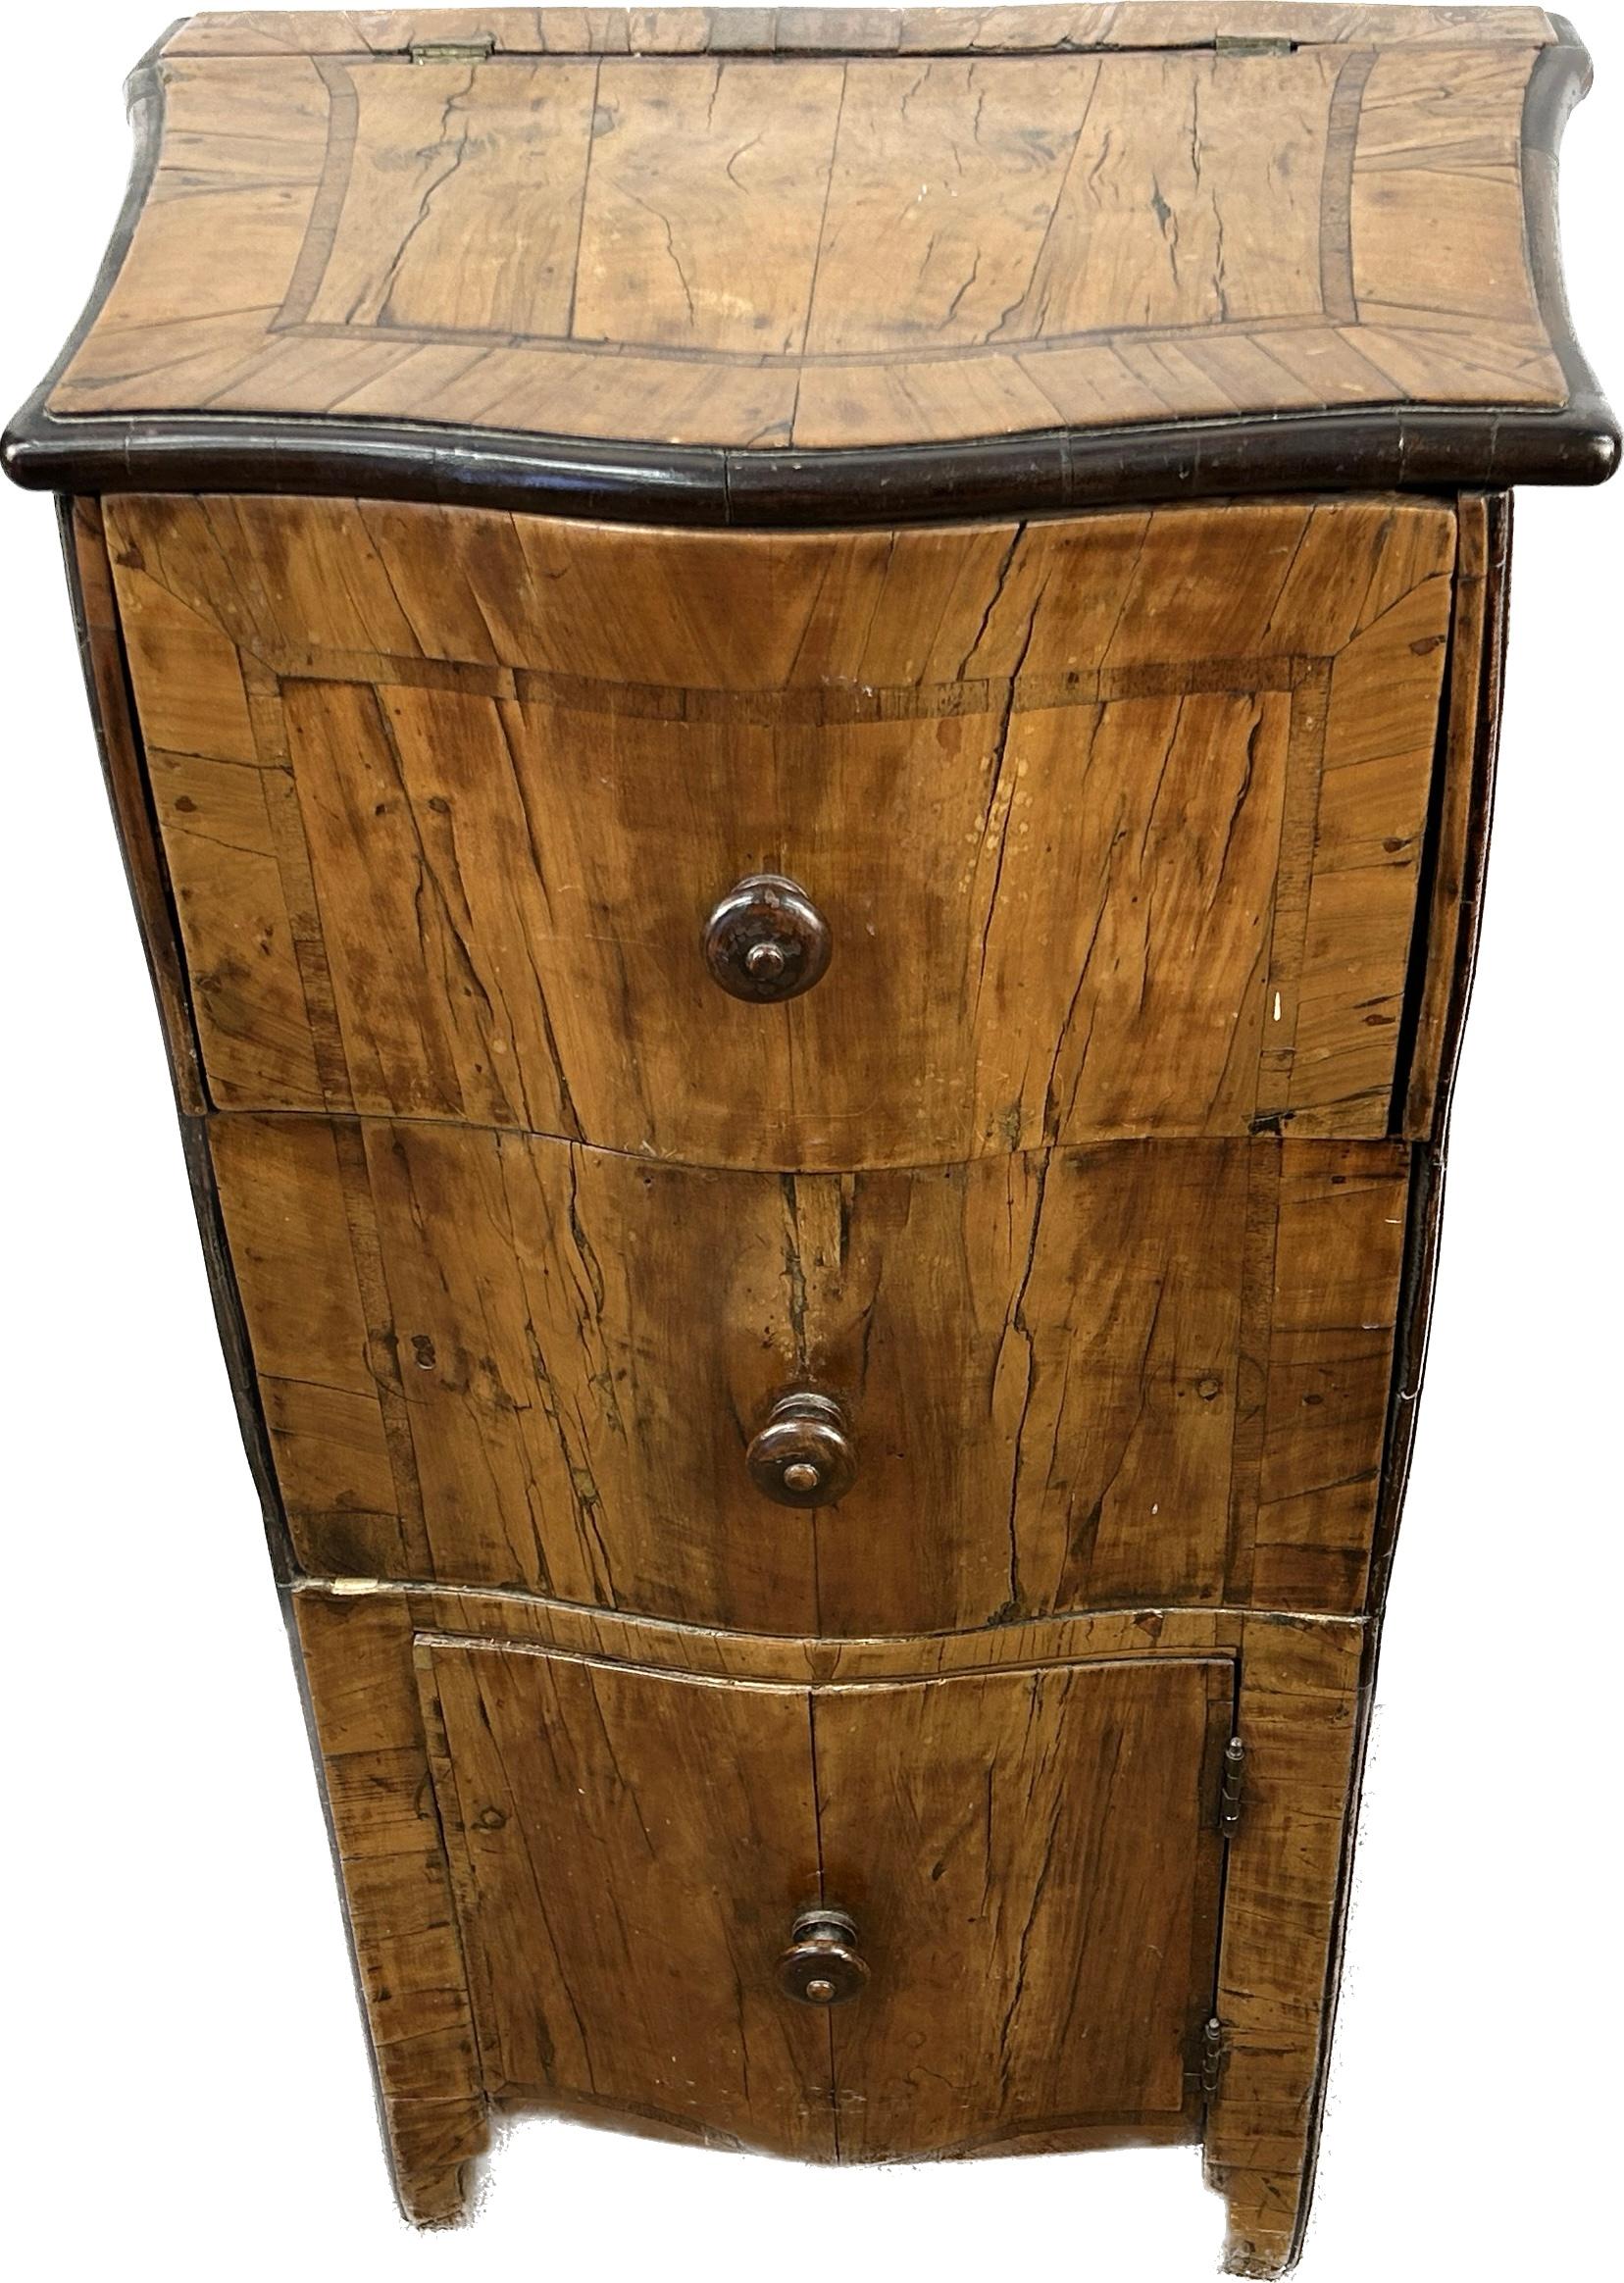 Unique 18th Century Italian Baroque style flip top walnut chest or nightstand. Chest has two deep drawers over a bottom door to a small nook for further storage. 